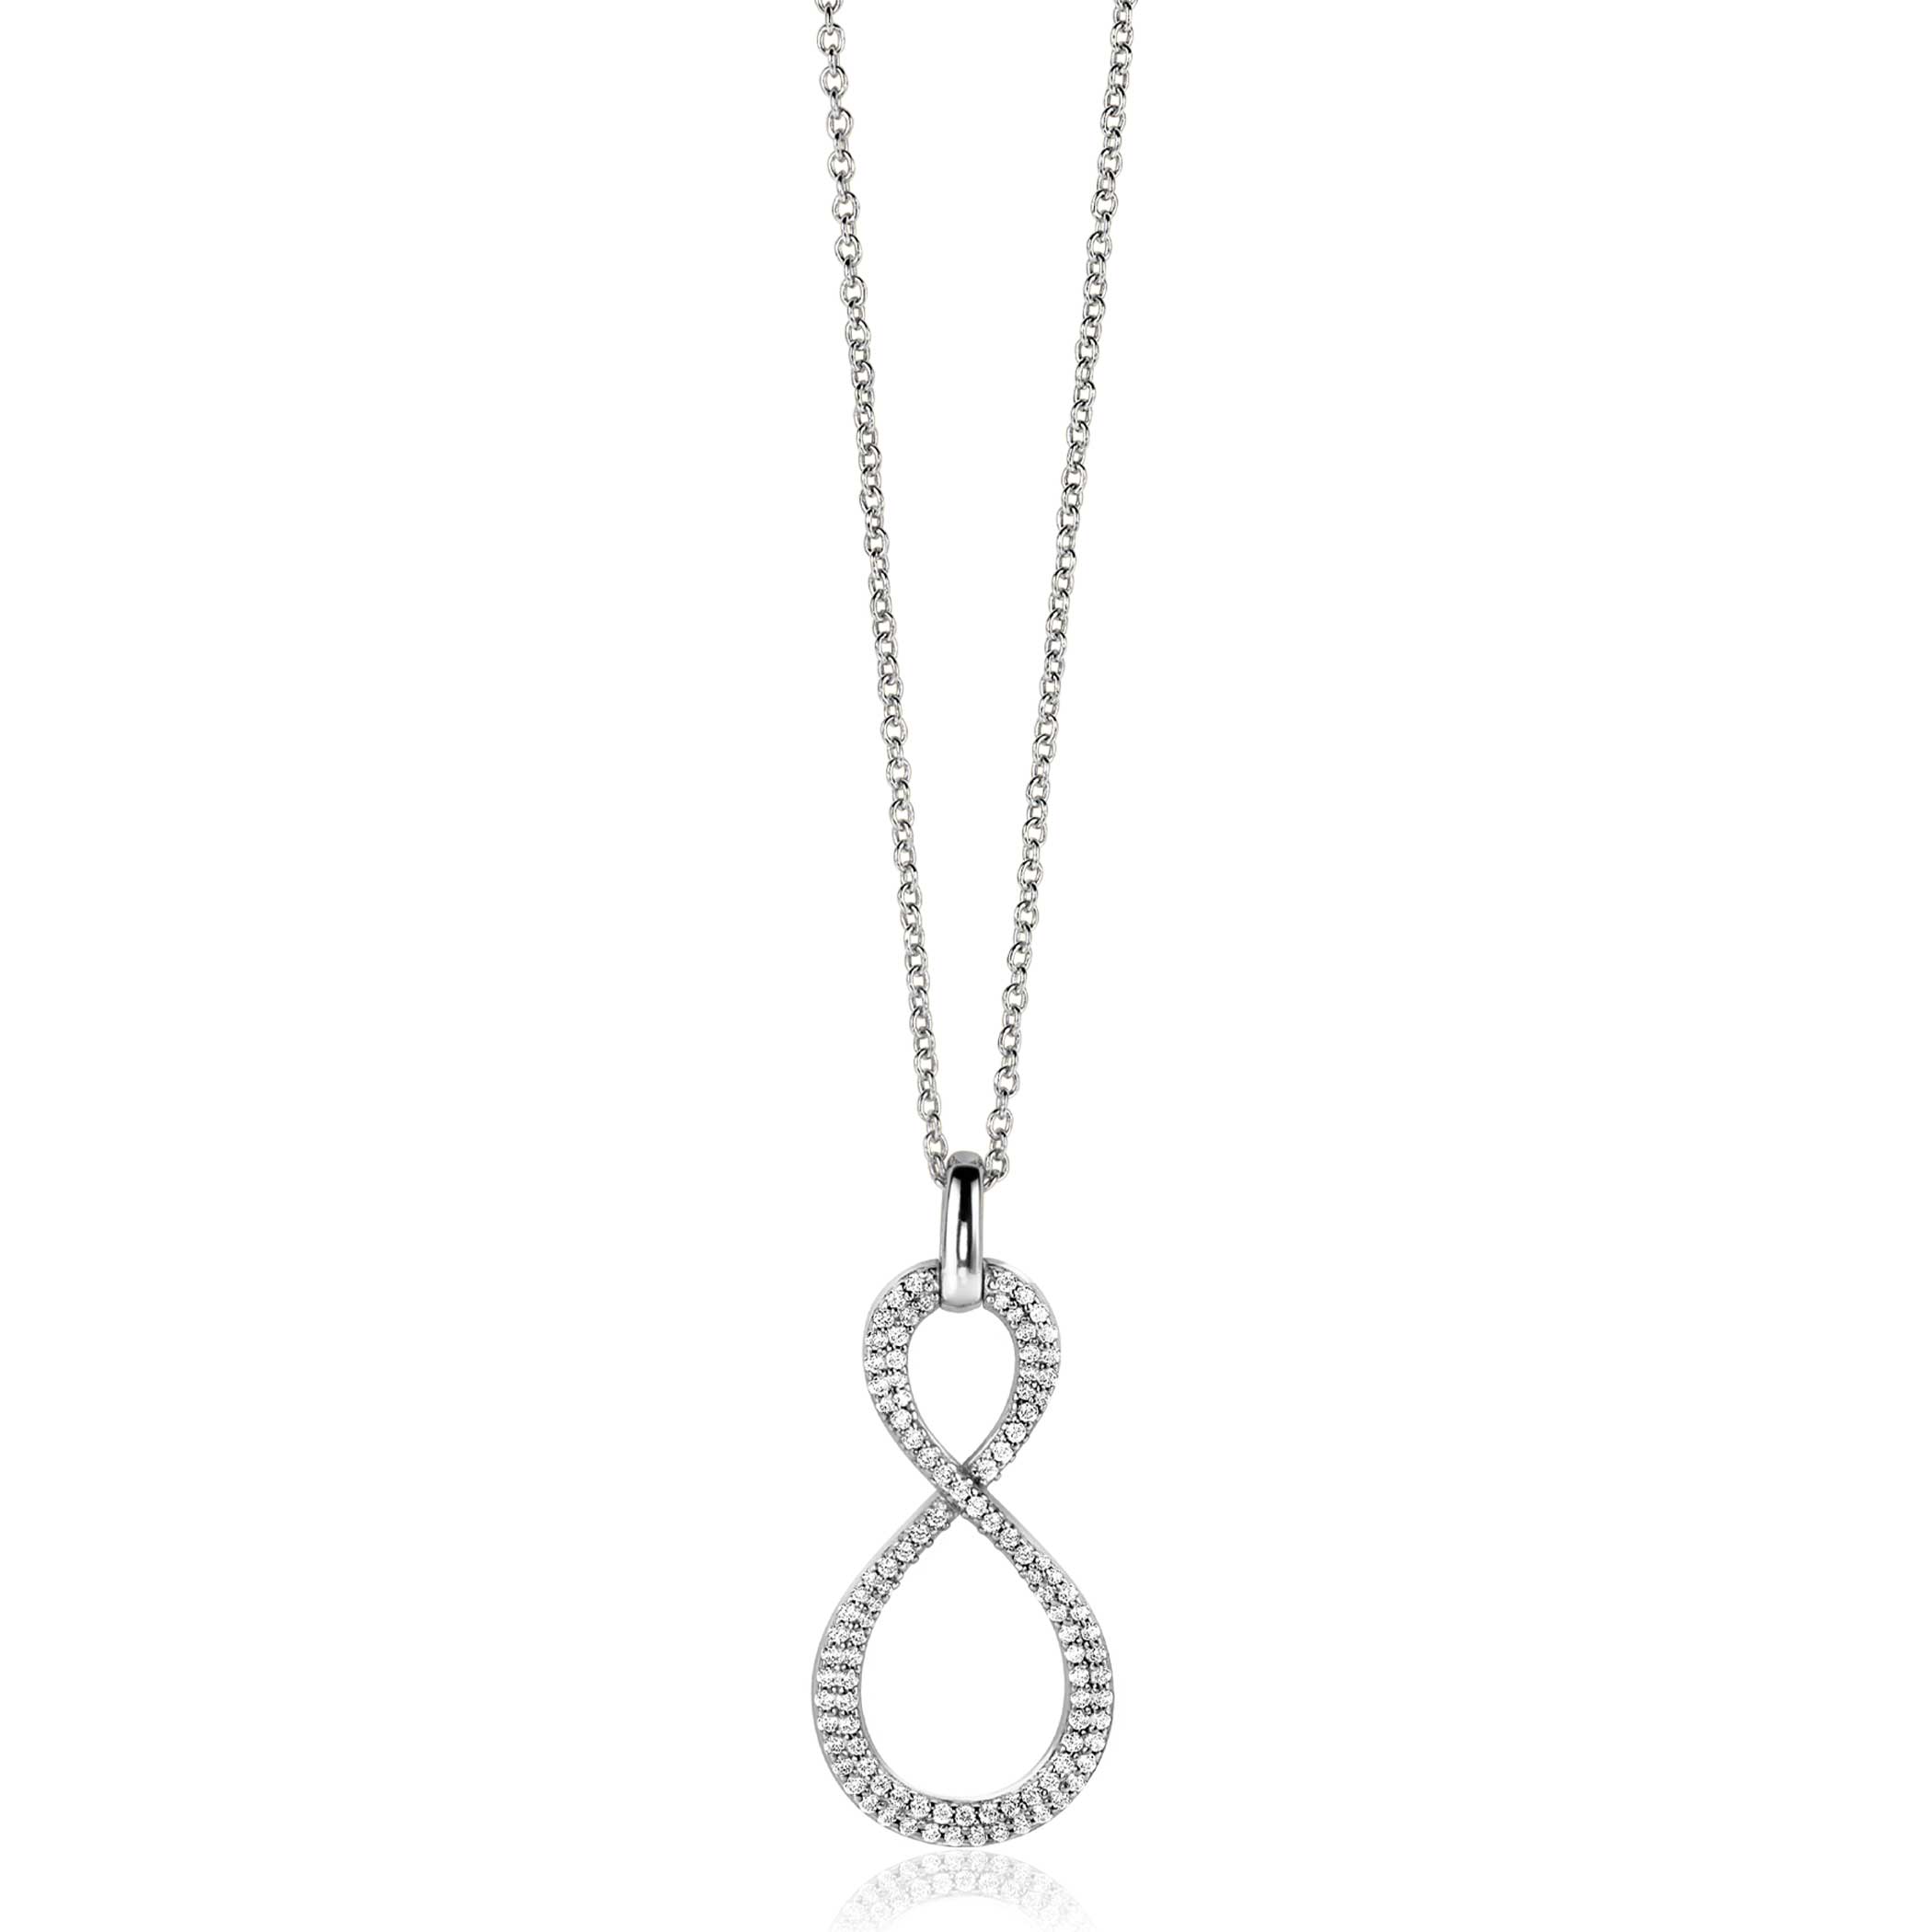 35mm ZINZI Sterling Silver Infinity Pendant White Zirconias ZIH2570 (excl. necklace)